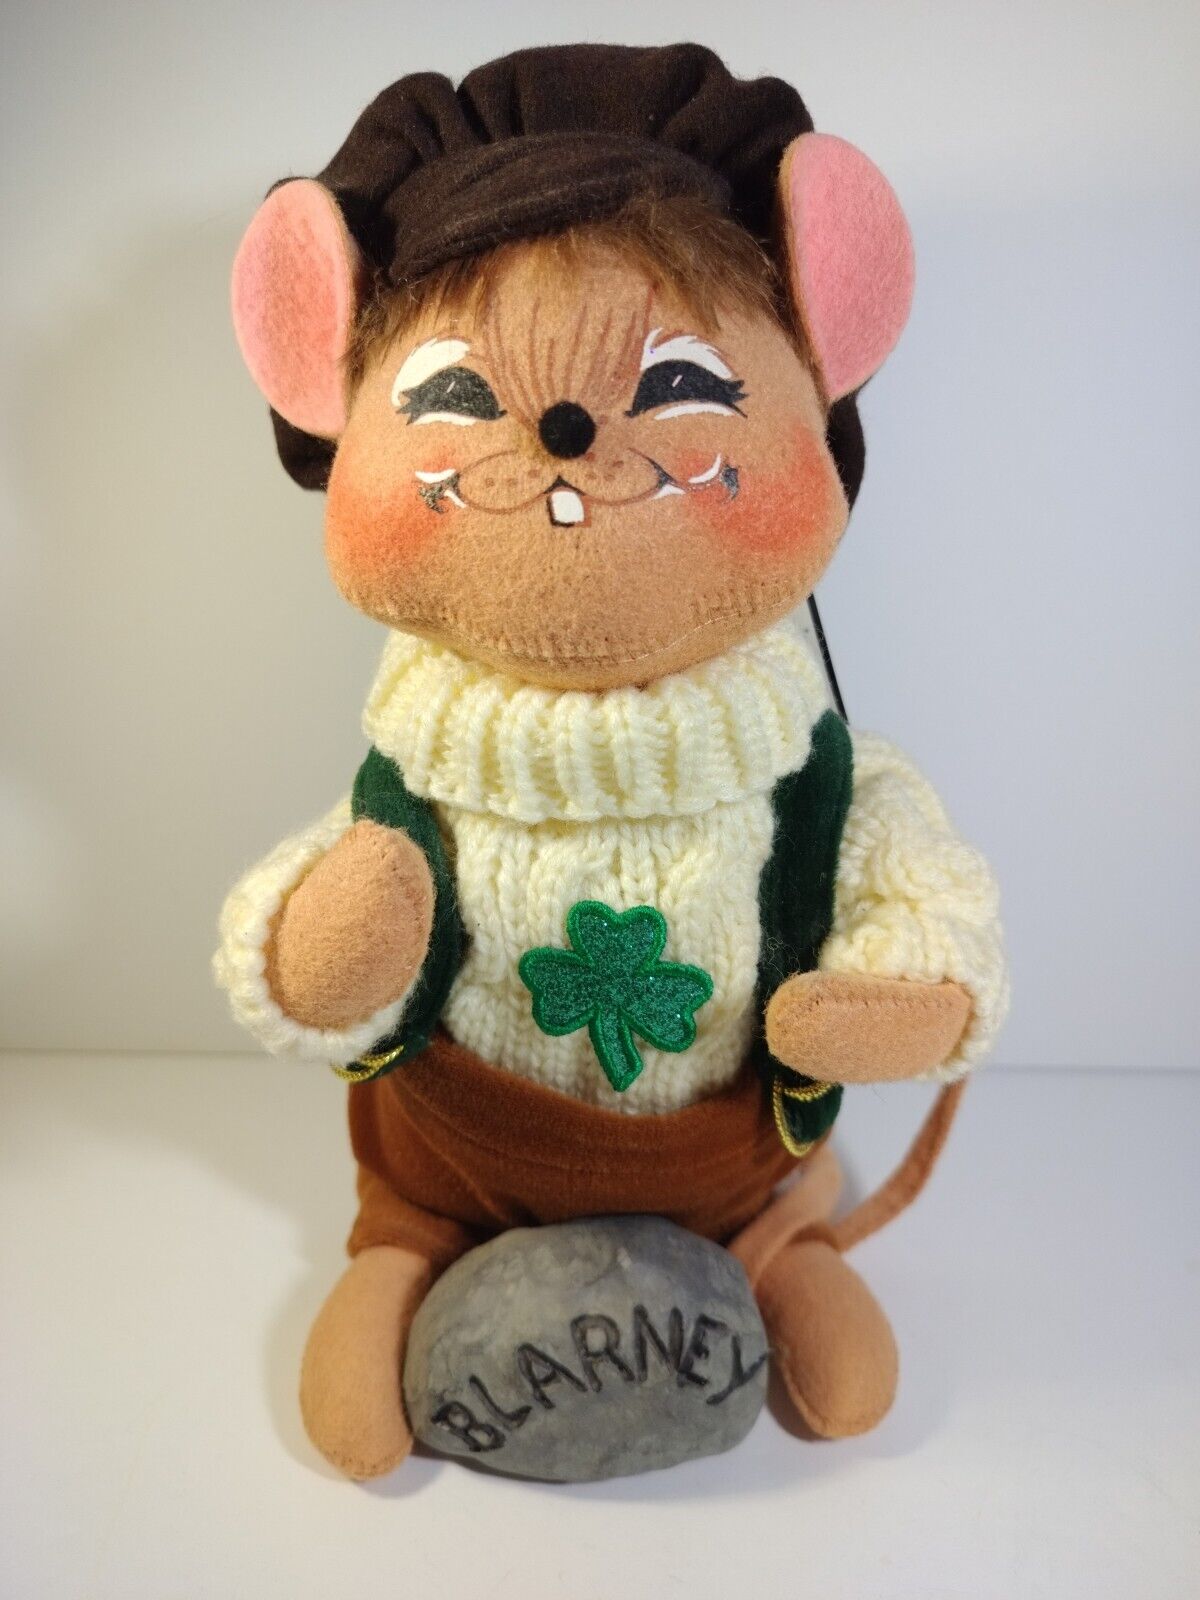 Annalee 10 Inch Blarney Stone Irish Mouse/Doll Excellent Condition 